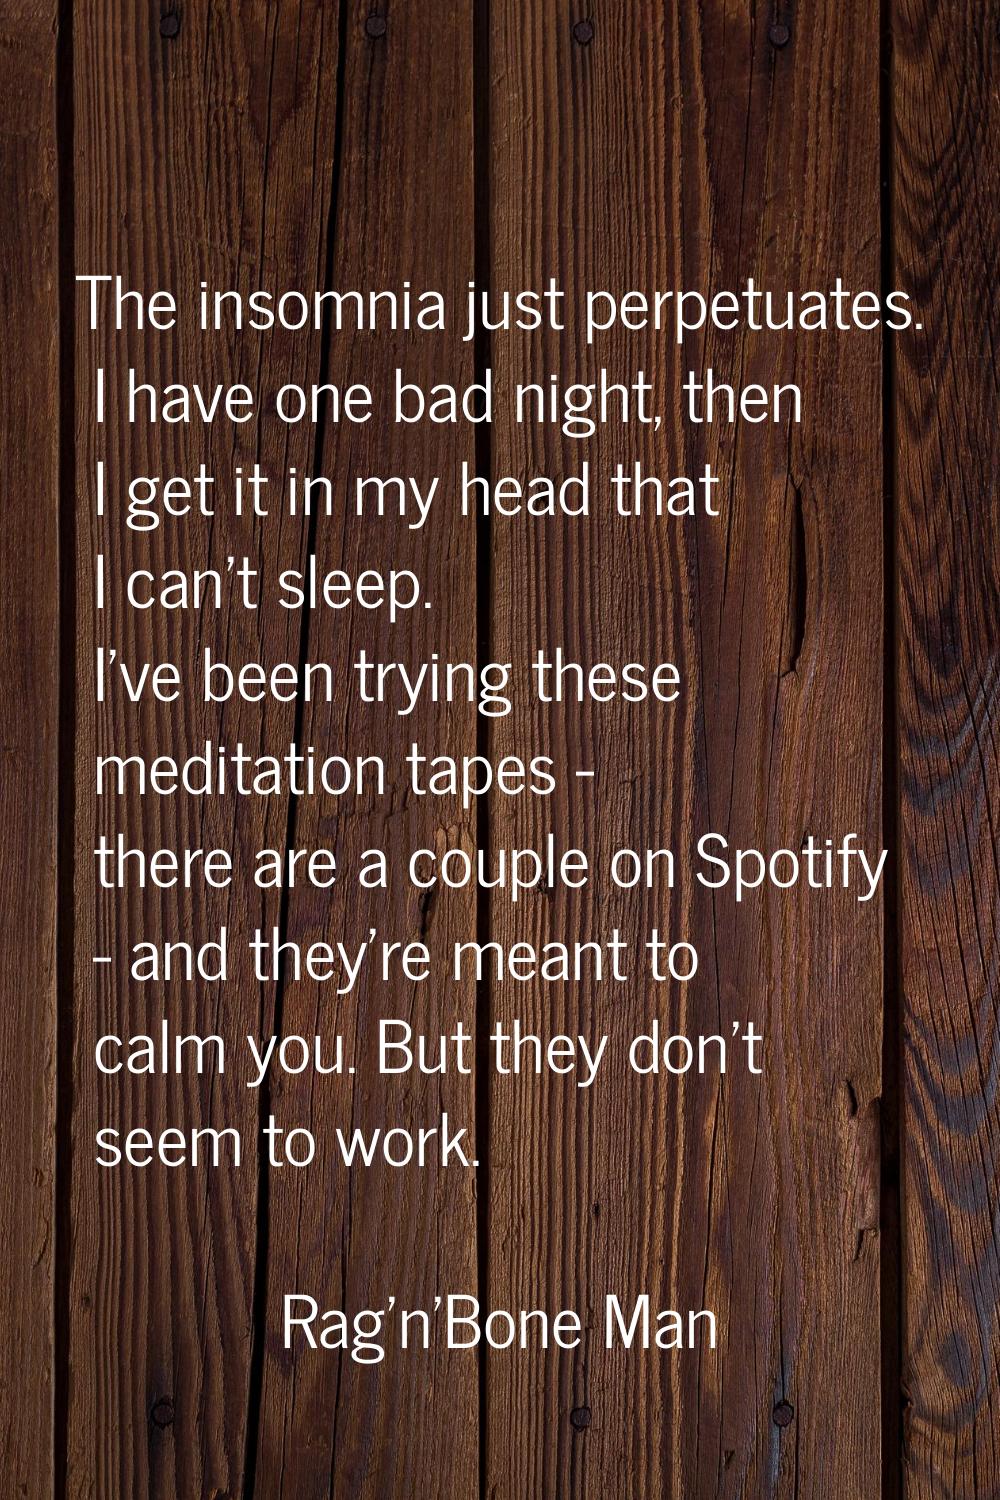 The insomnia just perpetuates. I have one bad night, then I get it in my head that I can't sleep. I